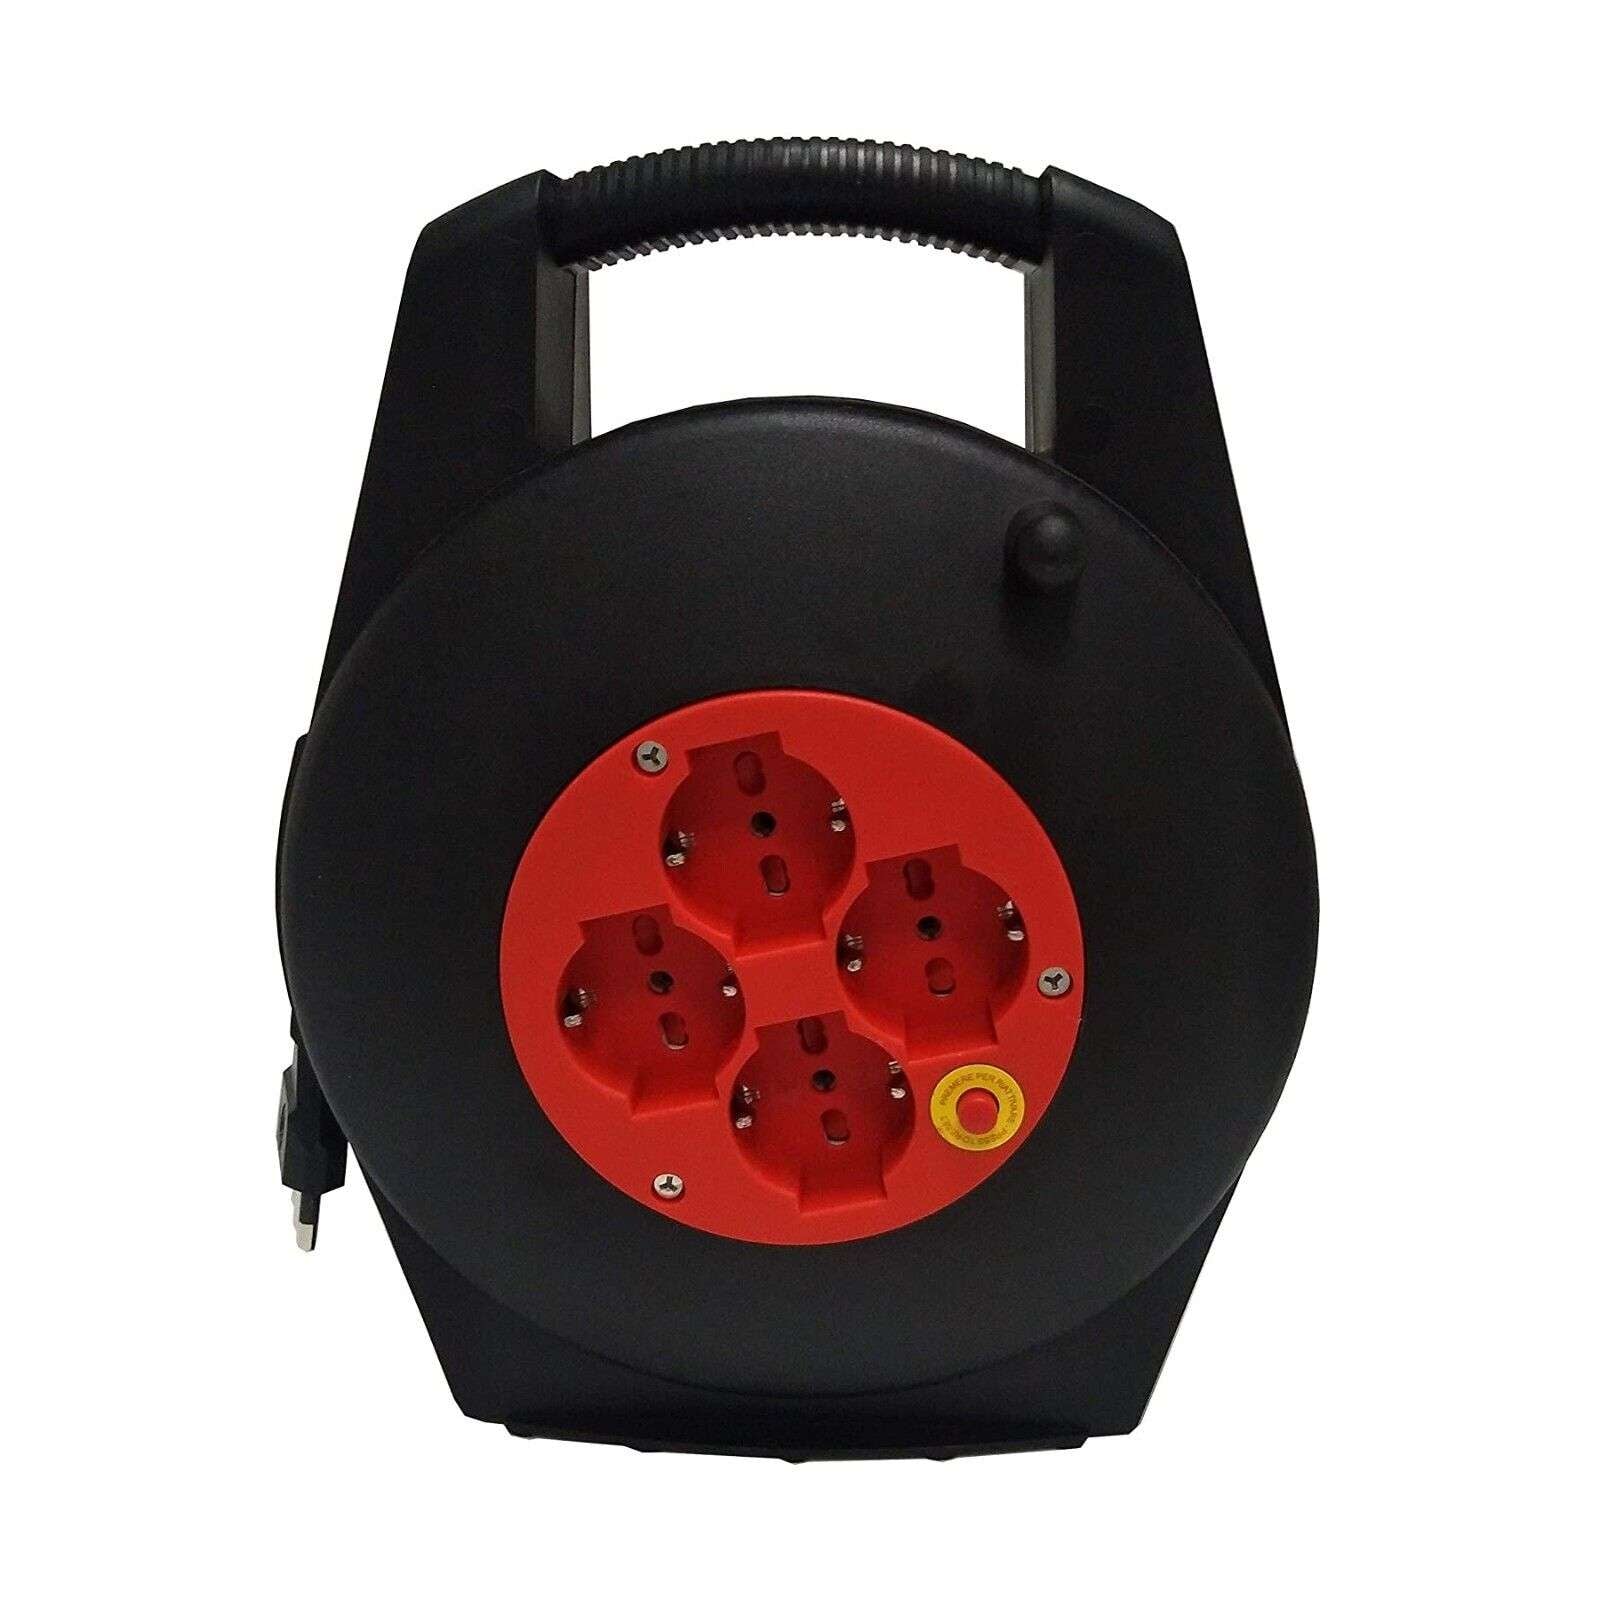 10 meter domestic cable reel with 4 outlets - Rosi RS76111